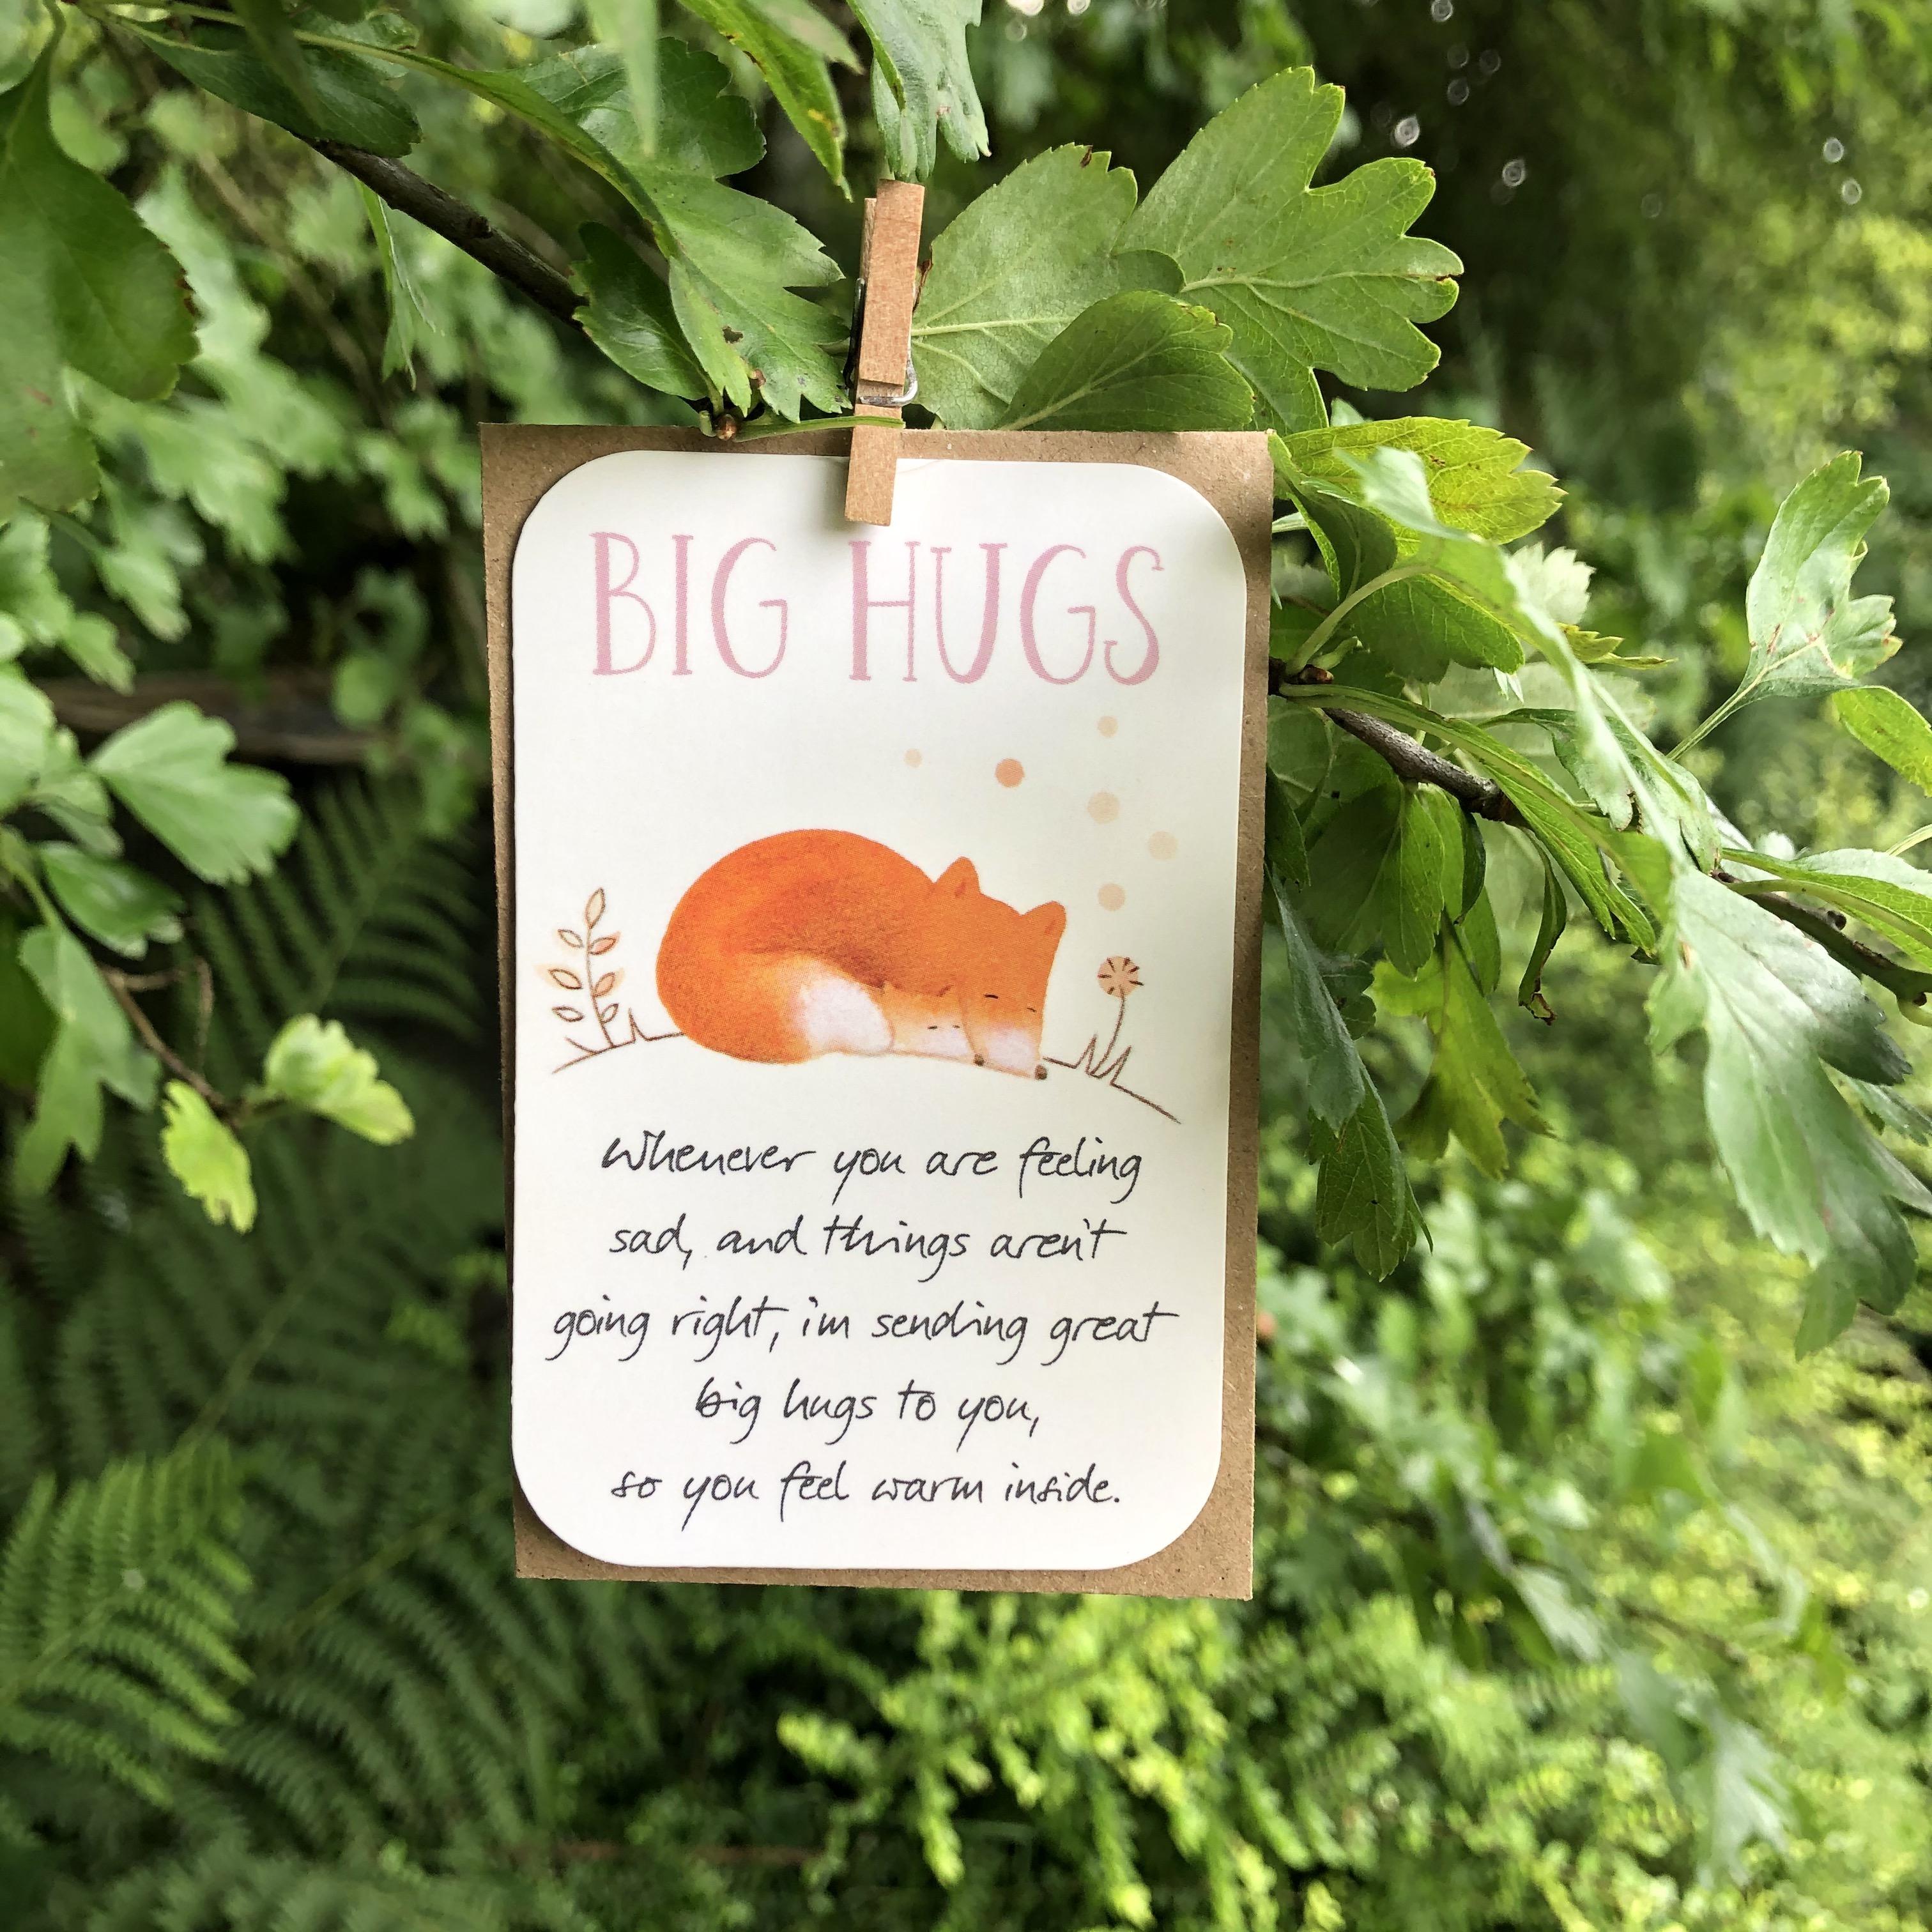 A small keepsake card with a 'Big Hugs' caption, and lovely little verse